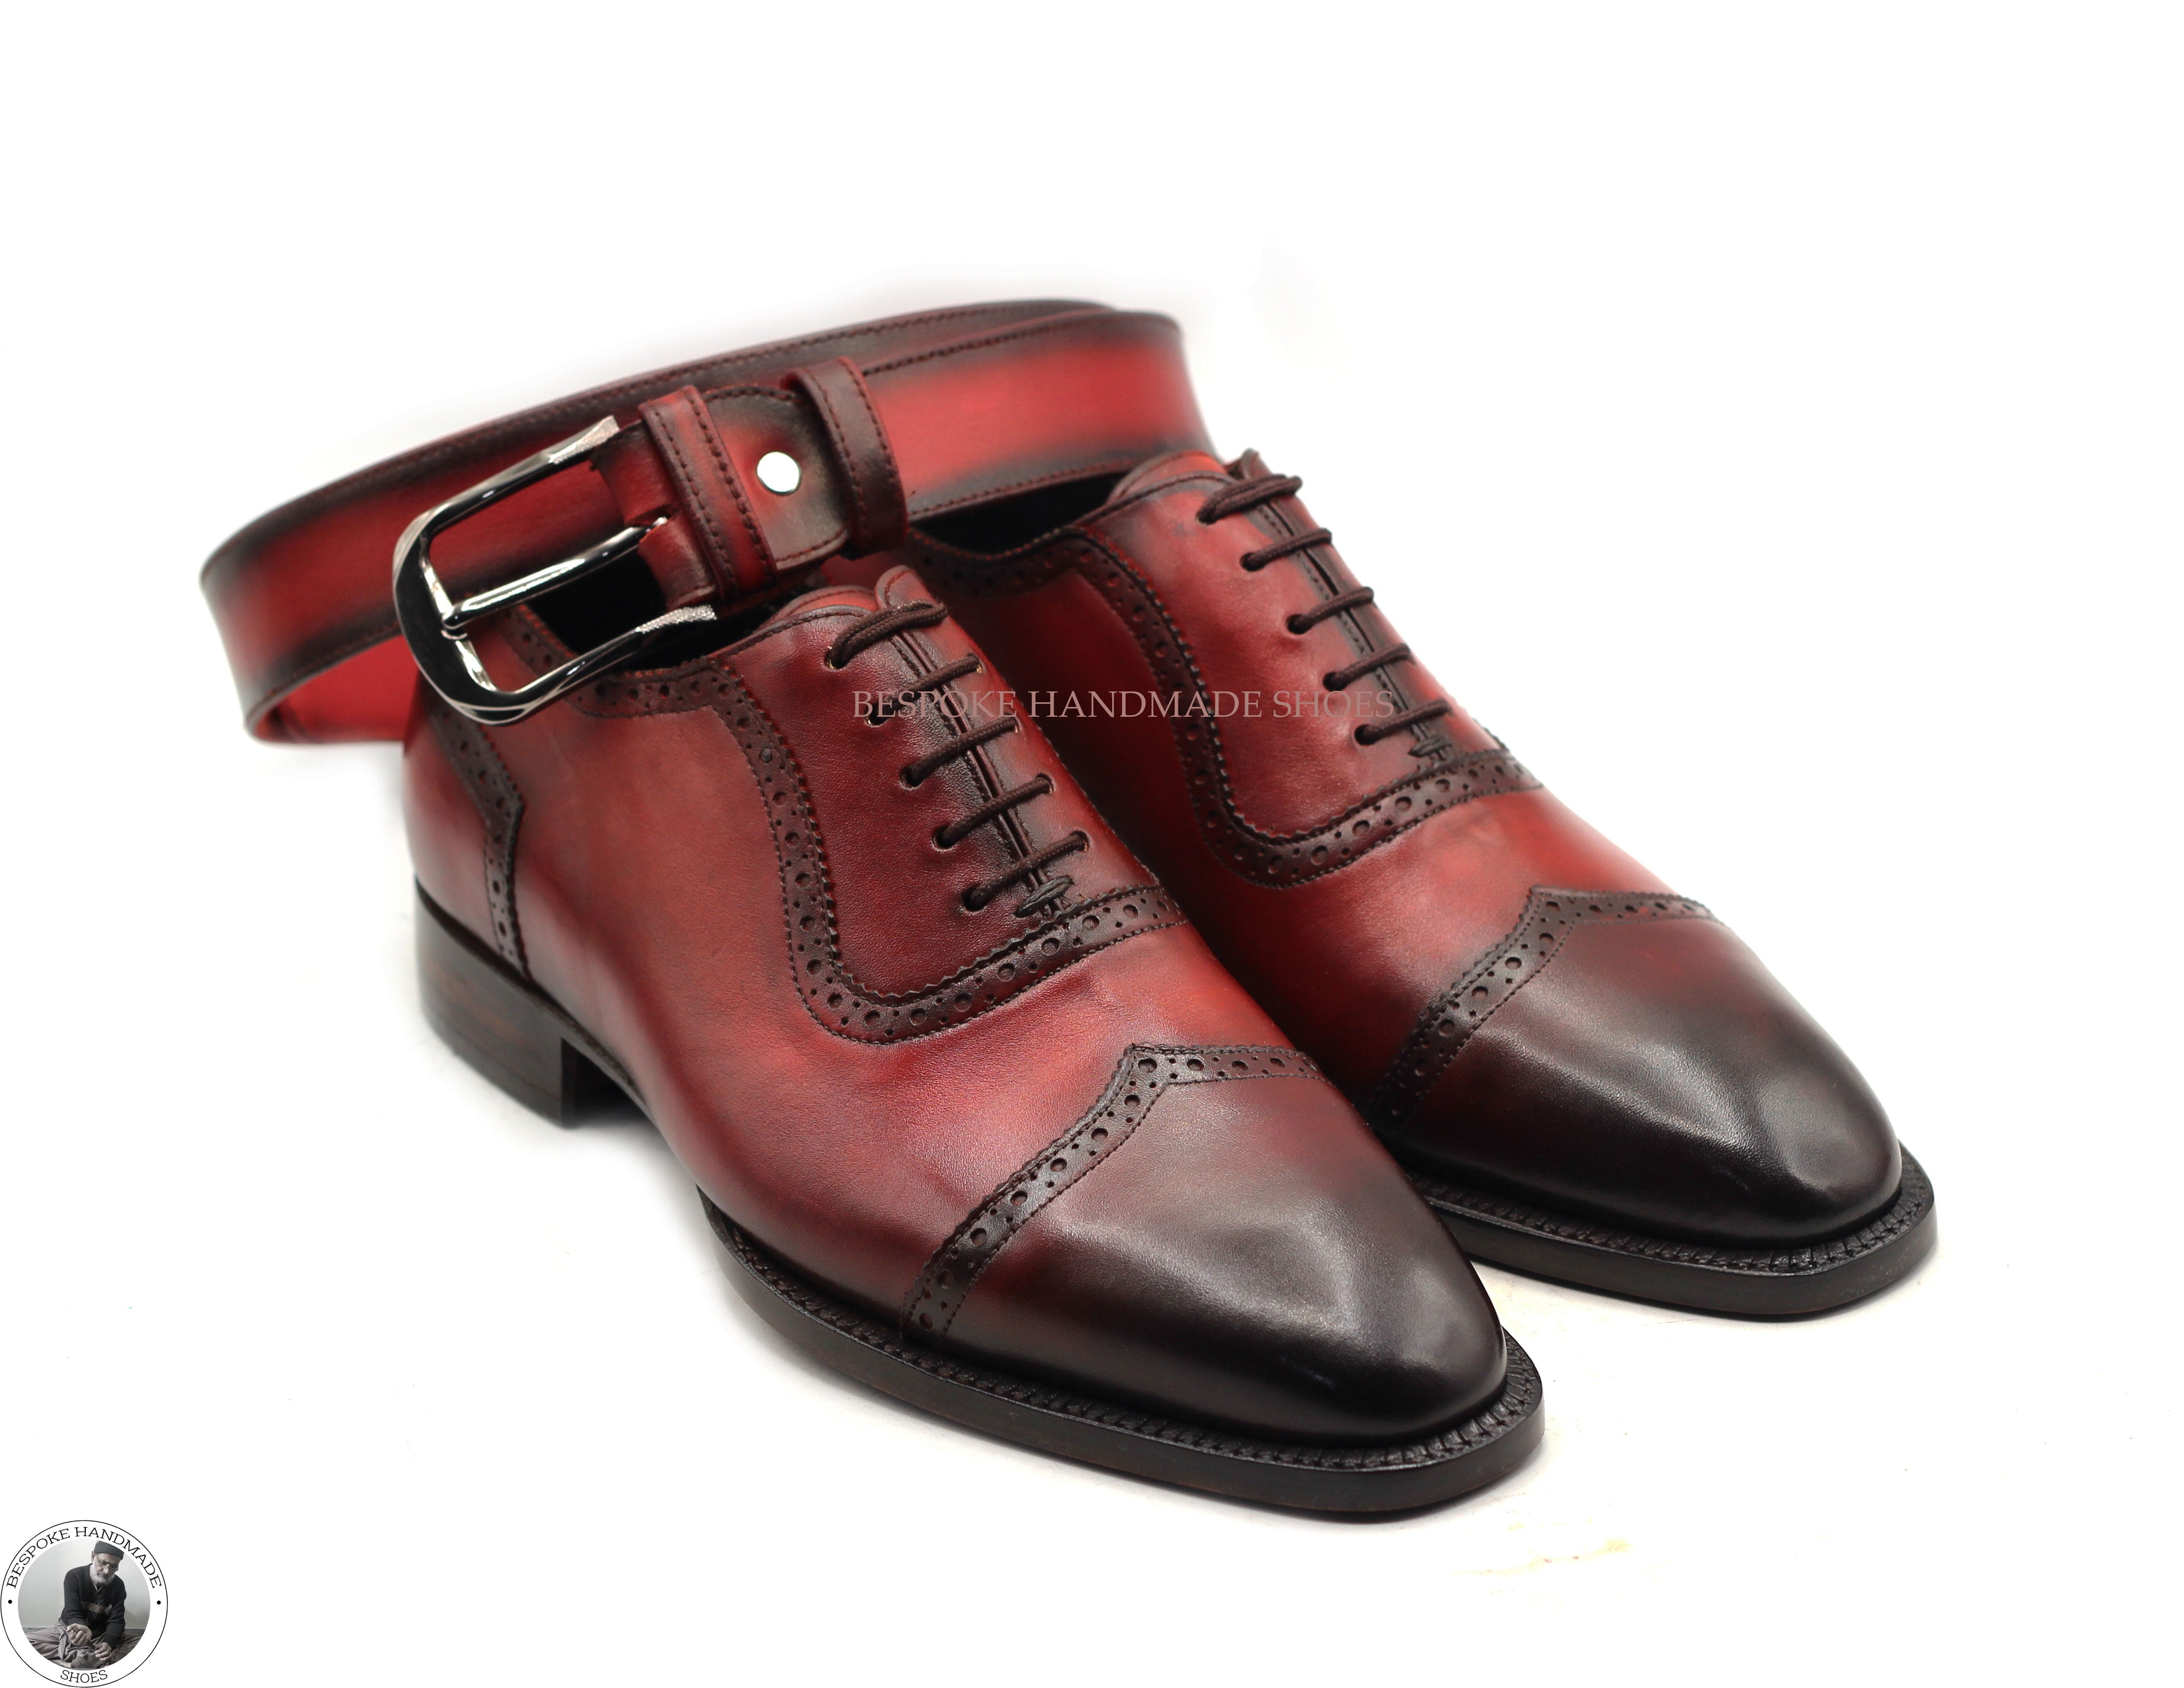 Bespoke Men's Handmade Genuine Red Leather Lace Up Oxford Toe Cap Stylish Men's Shoes